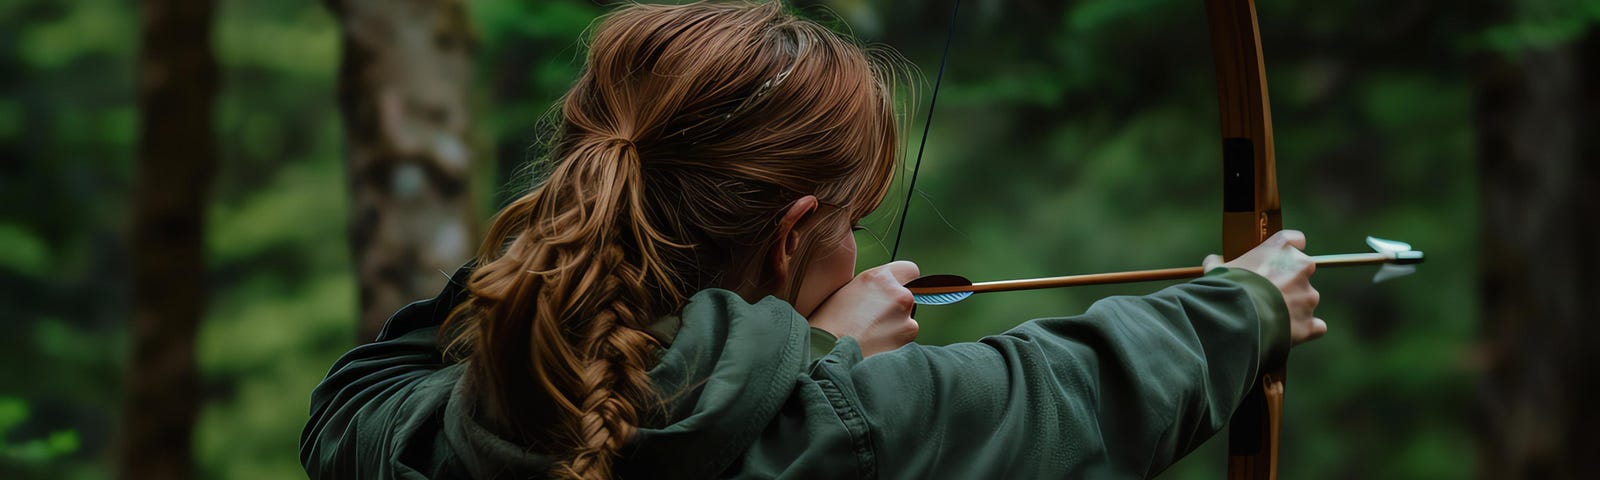 woman aims bow and arrow into woods